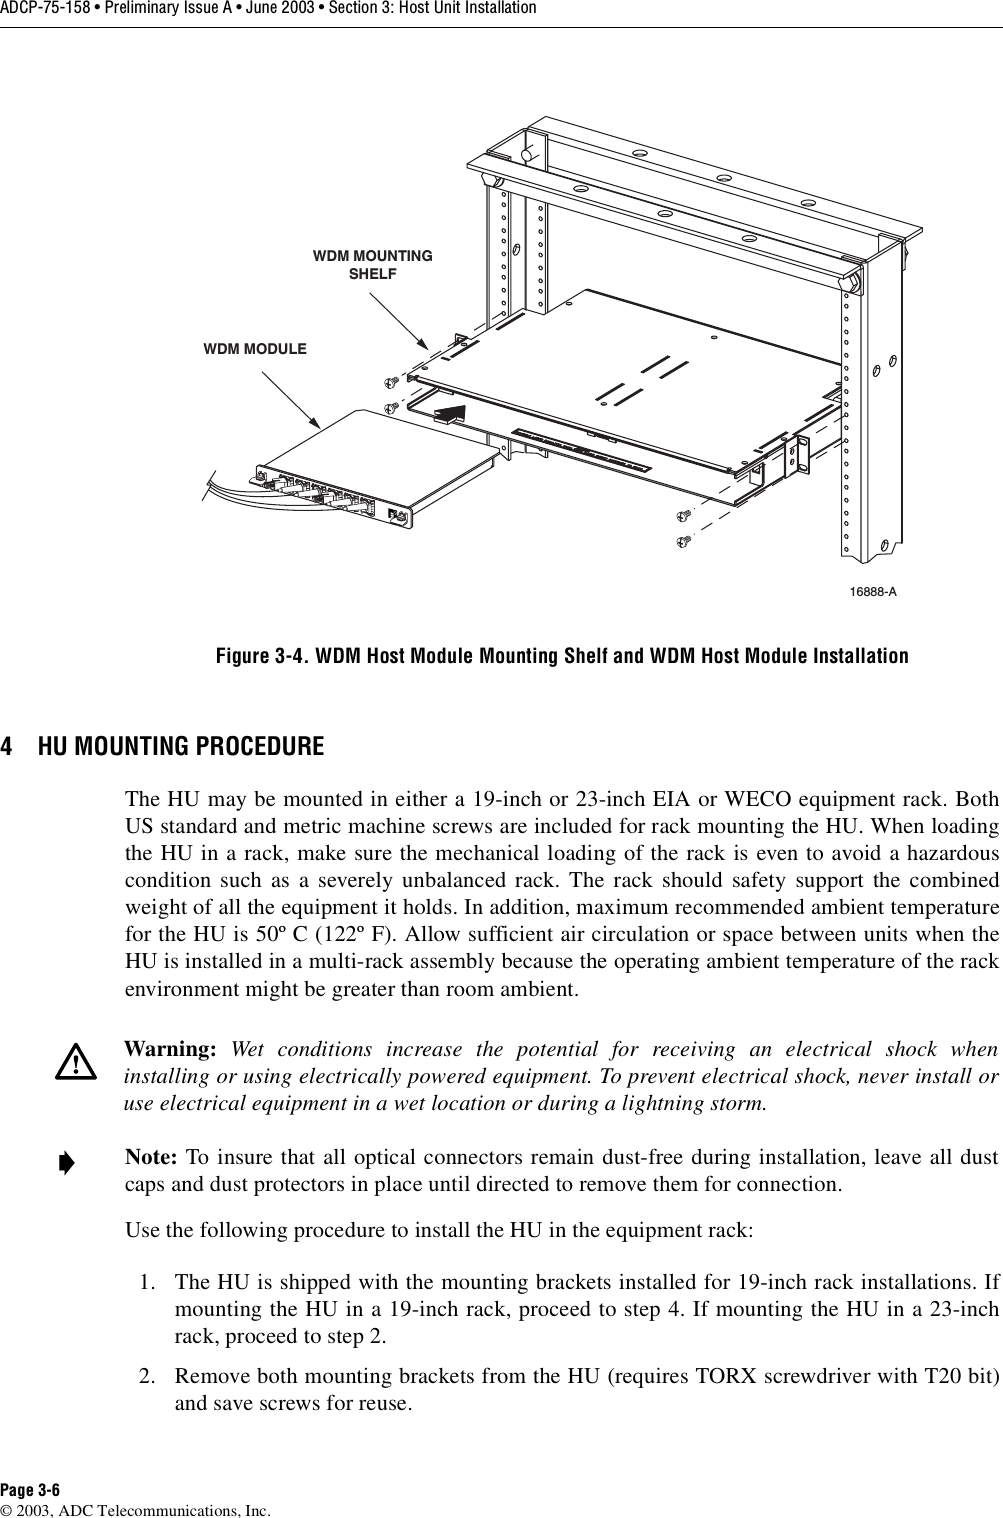 ADCP-75-158 • Preliminary Issue A • June 2003 • Section 3: Host Unit InstallationPage 3-6© 2003, ADC Telecommunications, Inc.Figure 3-4. WDM Host Module Mounting Shelf and WDM Host Module Installation4 HU MOUNTING PROCEDUREThe HU may be mounted in either a 19-inch or 23-inch EIA or WECO equipment rack. BothUS standard and metric machine screws are included for rack mounting the HU. When loadingthe HU in a rack, make sure the mechanical loading of the rack is even to avoid a hazardouscondition such as a severely unbalanced rack. The rack should safety support the combinedweight of all the equipment it holds. In addition, maximum recommended ambient temperaturefor the HU is 50º C (122º F). Allow sufficient air circulation or space between units when theHU is installed in a multi-rack assembly because the operating ambient temperature of the rackenvironment might be greater than room ambient. Use the following procedure to install the HU in the equipment rack:1. The HU is shipped with the mounting brackets installed for 19-inch rack installations. Ifmounting the HU in a 19-inch rack, proceed to step 4. If mounting the HU in a 23-inchrack, proceed to step 2. 2. Remove both mounting brackets from the HU (requires TORX screwdriver with T20 bit)and save screws for reuse. Warning:  Wet conditions increase the potential for receiving an electrical shock wheninstalling or using electrically powered equipment. To prevent electrical shock, never install oruse electrical equipment in a wet location or during a lightning storm. Note: To insure that all optical connectors remain dust-free during installation, leave all dustcaps and dust protectors in place until directed to remove them for connection. 16888-A WDM MODULEWDM MOUNTINGSHELF